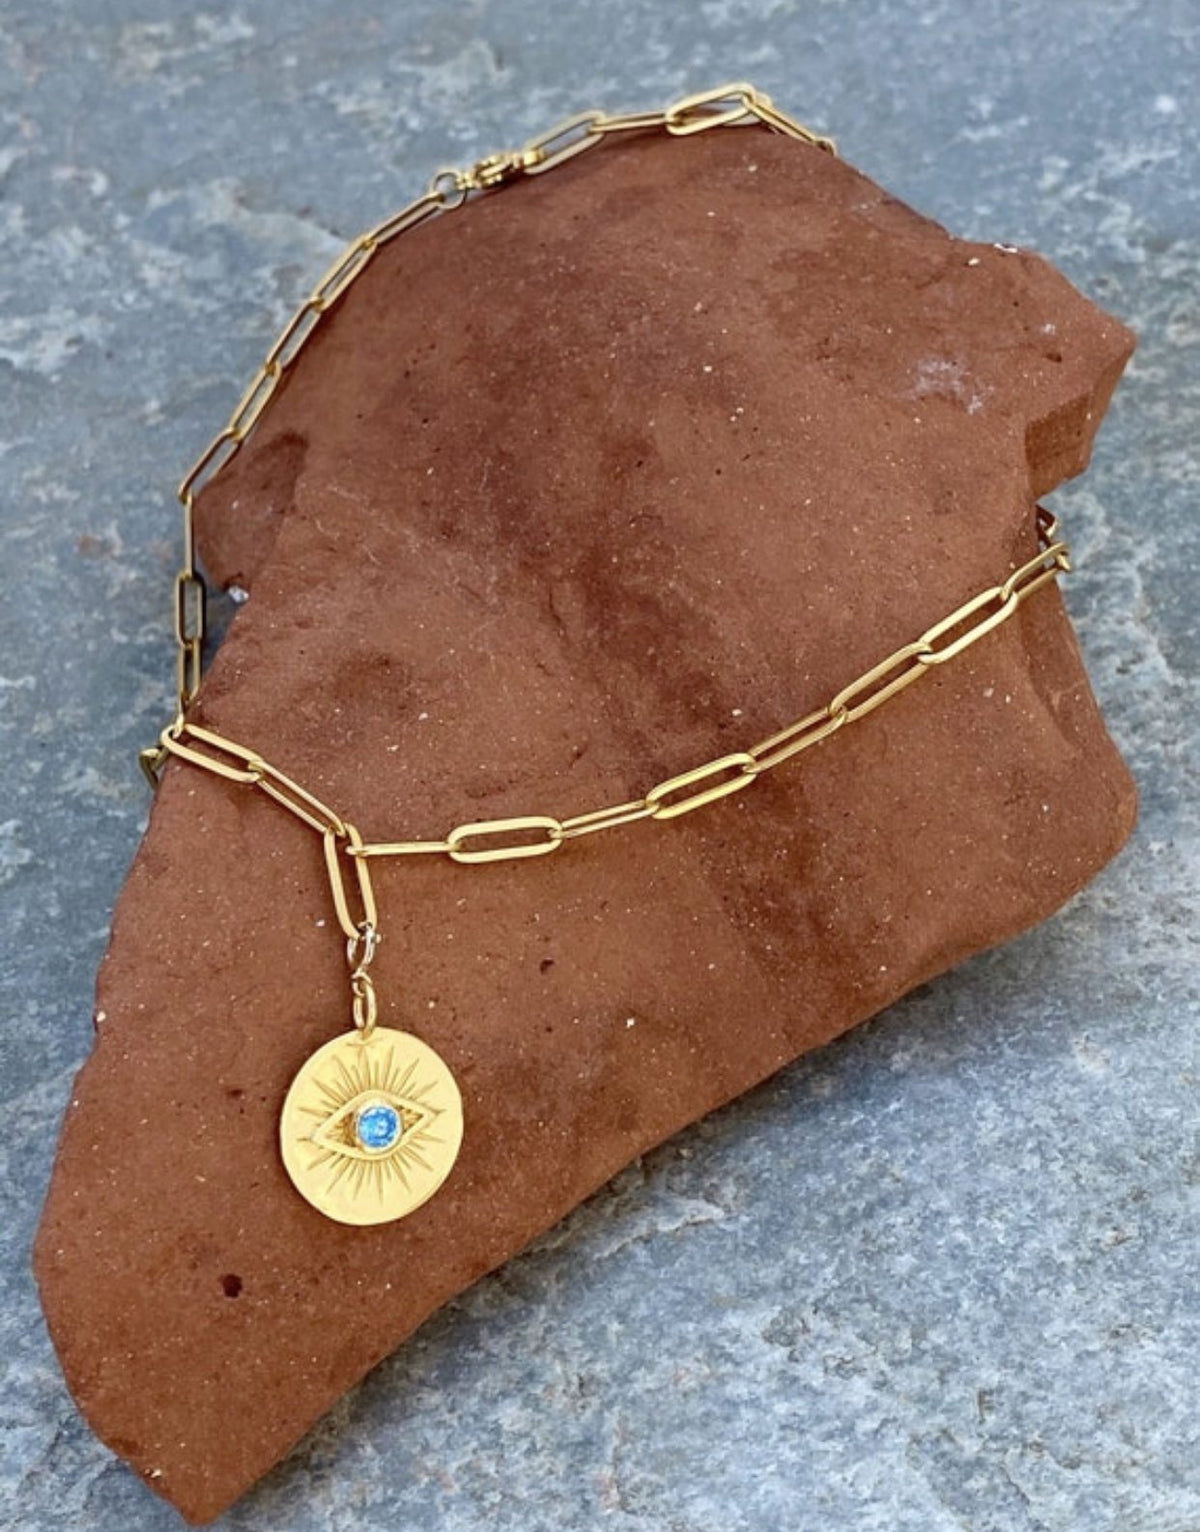 Evil eye necklace gold with stainless steel paperclip chain